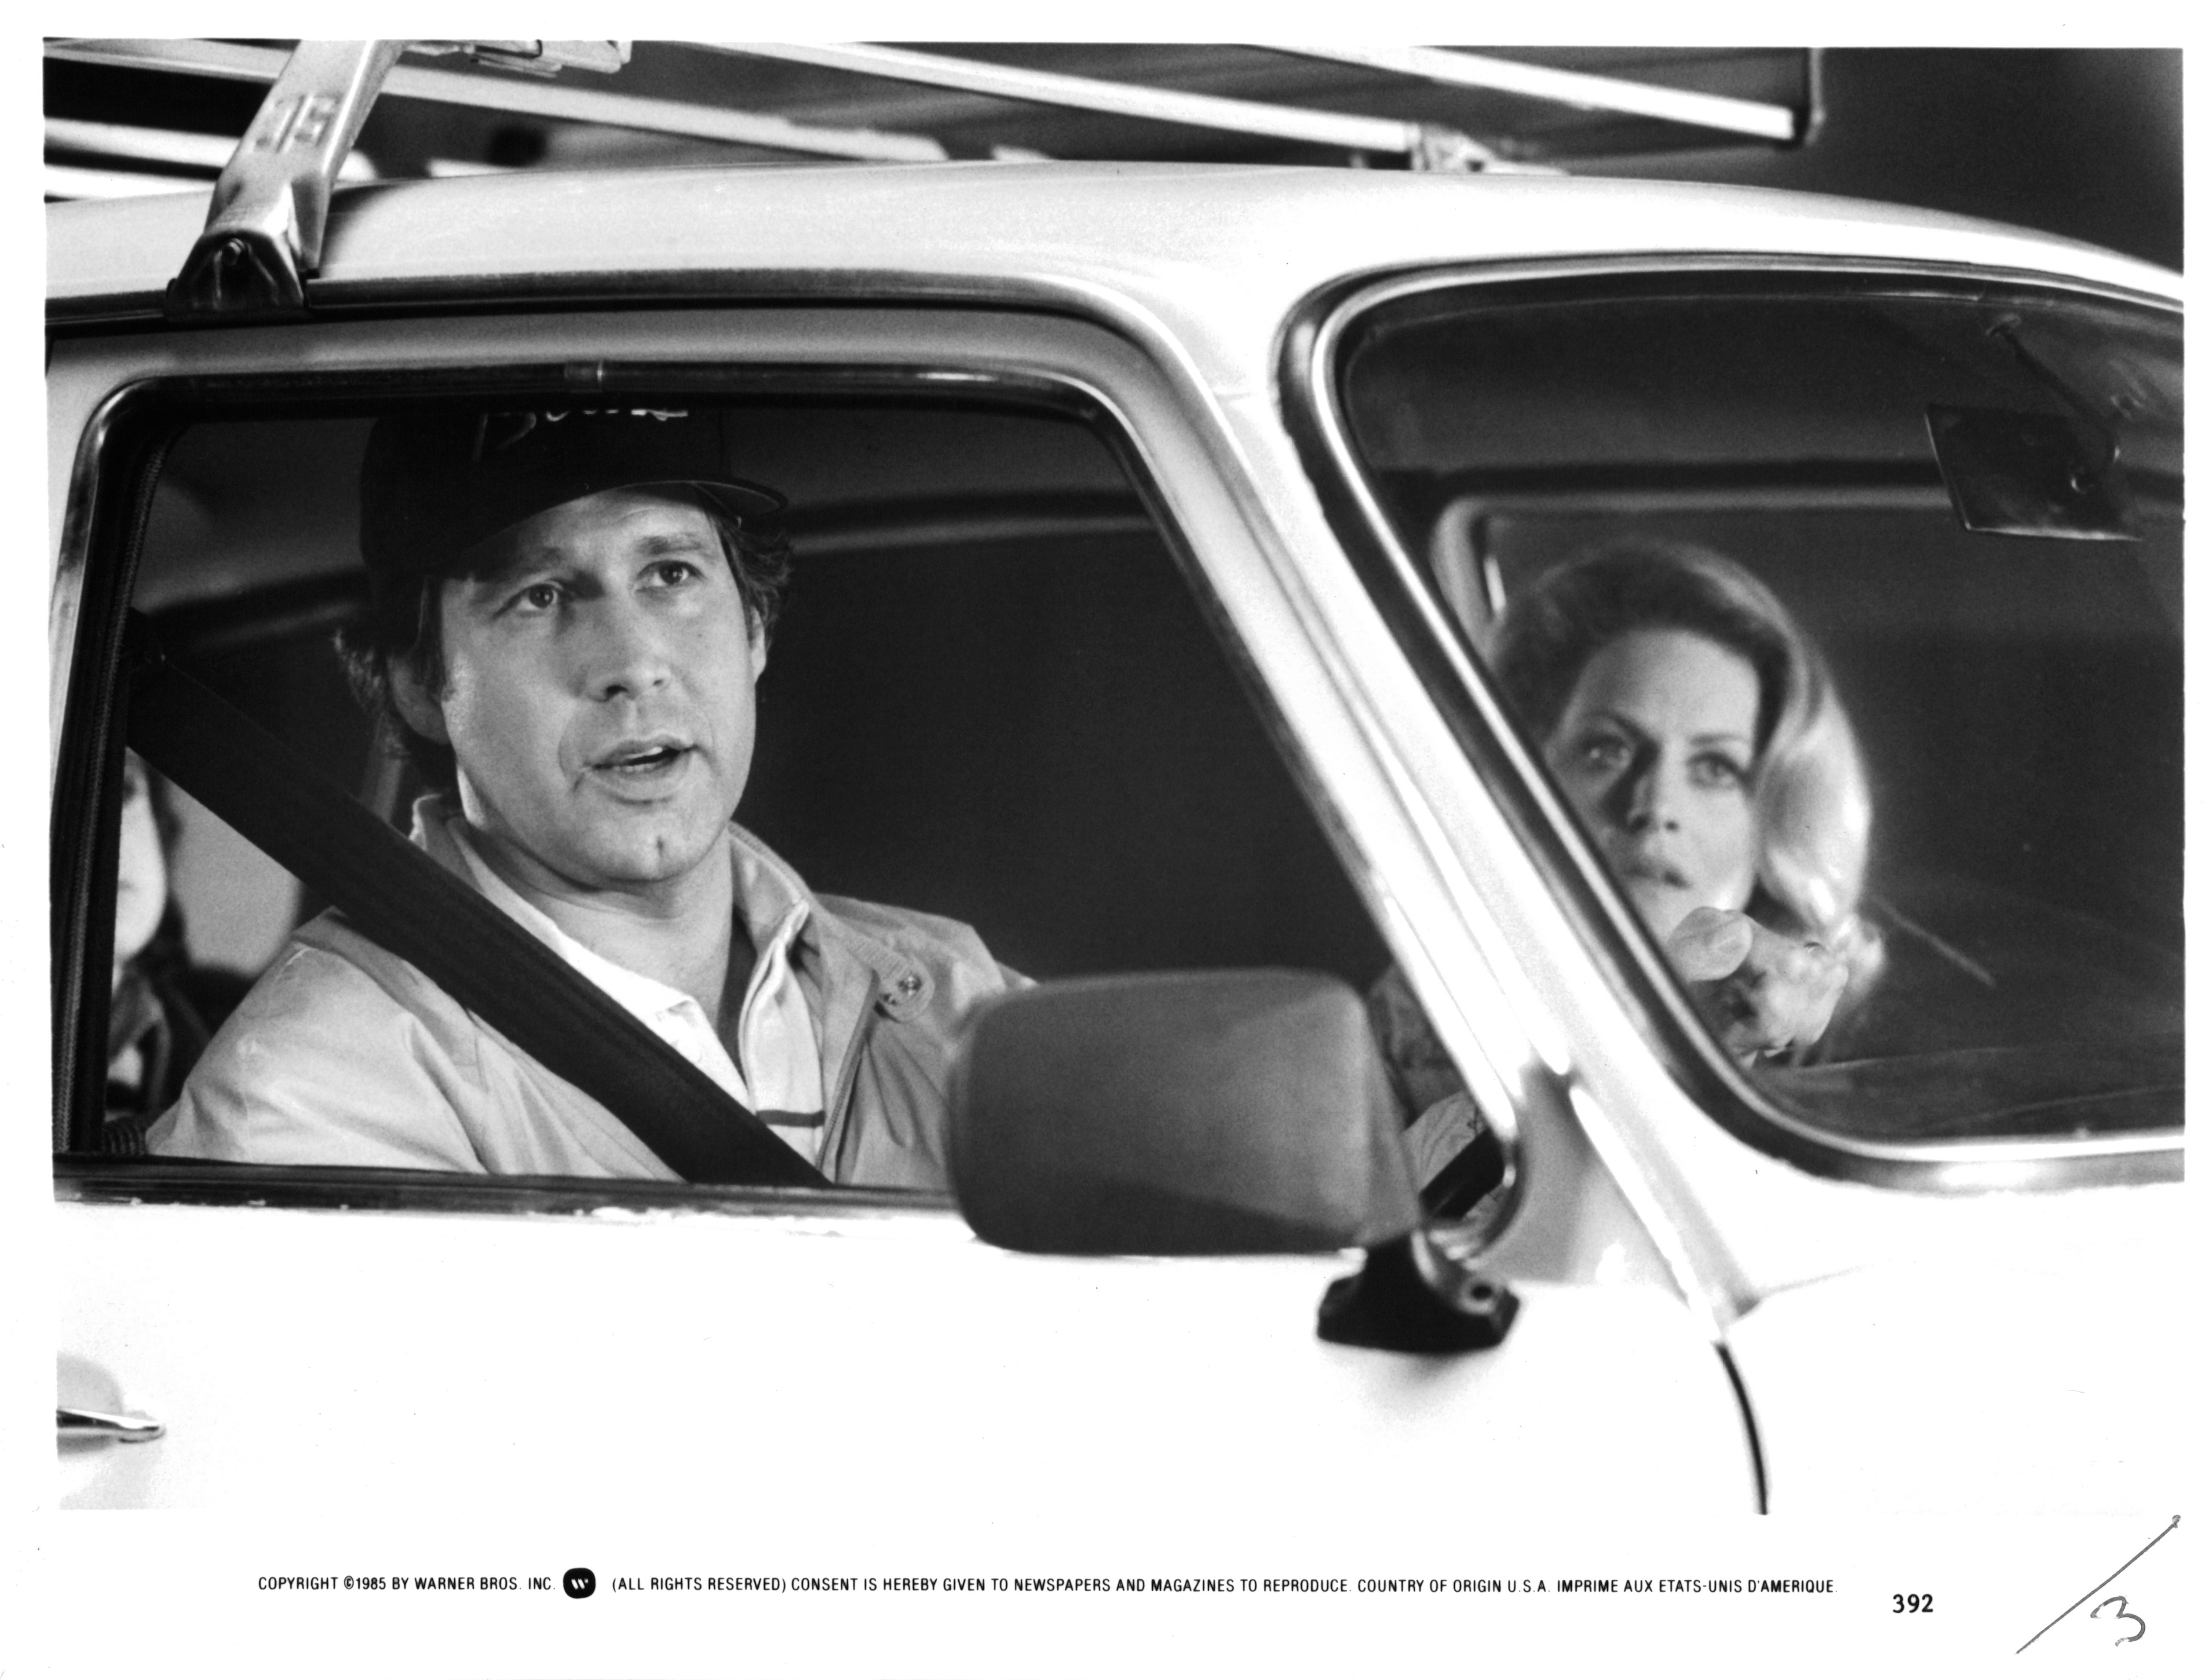 Chevy Chase and Beverly D'Angelo in 'National Lampoon's European Vacation' in 1985